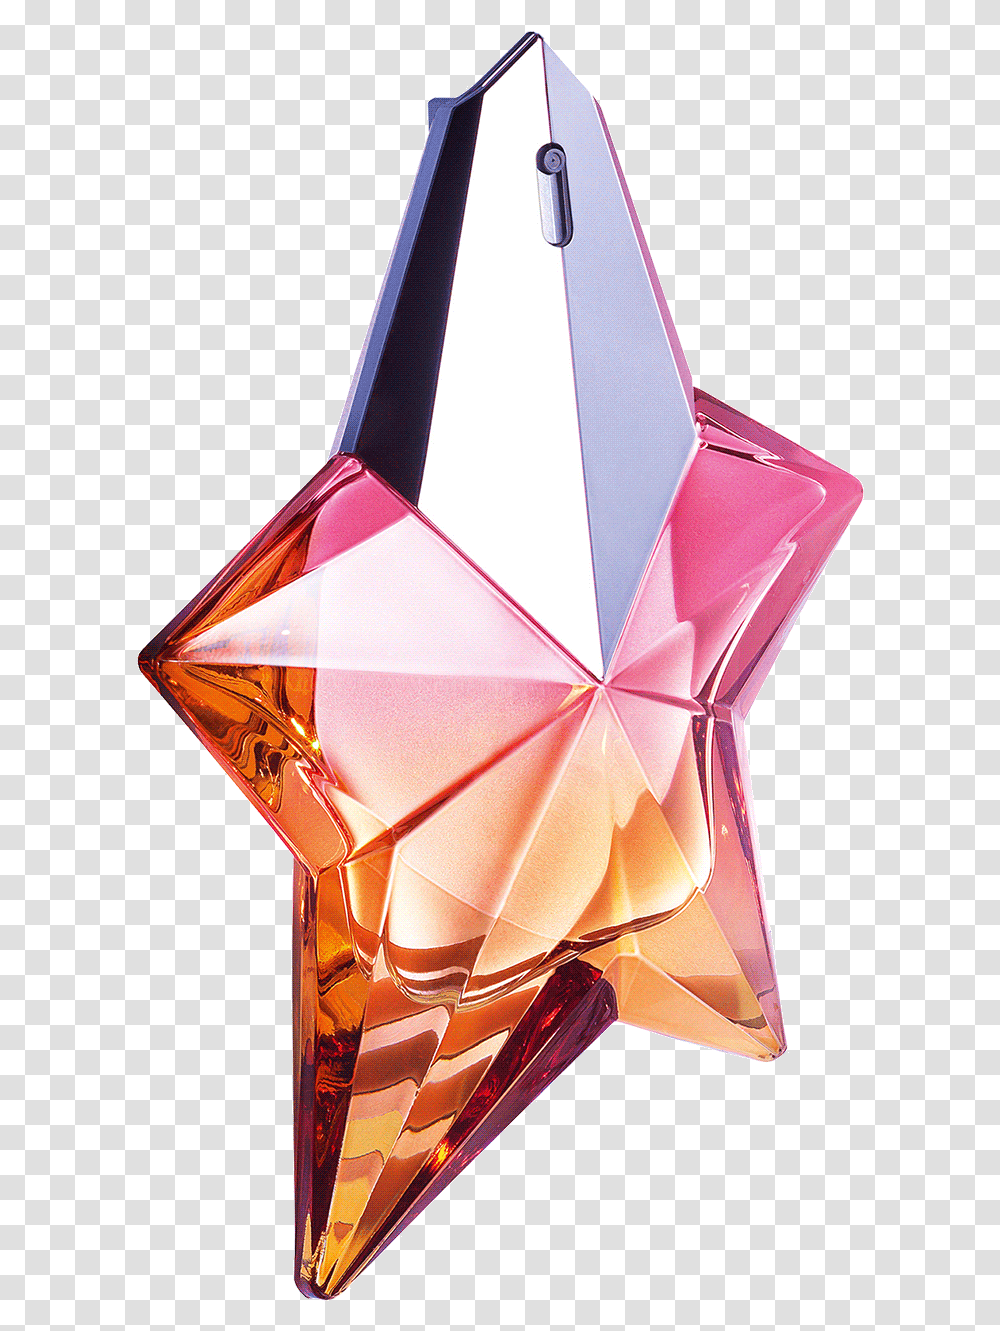 Sexy Angel Mugler Angel Eau Croisiere, Crystal, Gemstone, Jewelry, Accessories Transparent Png